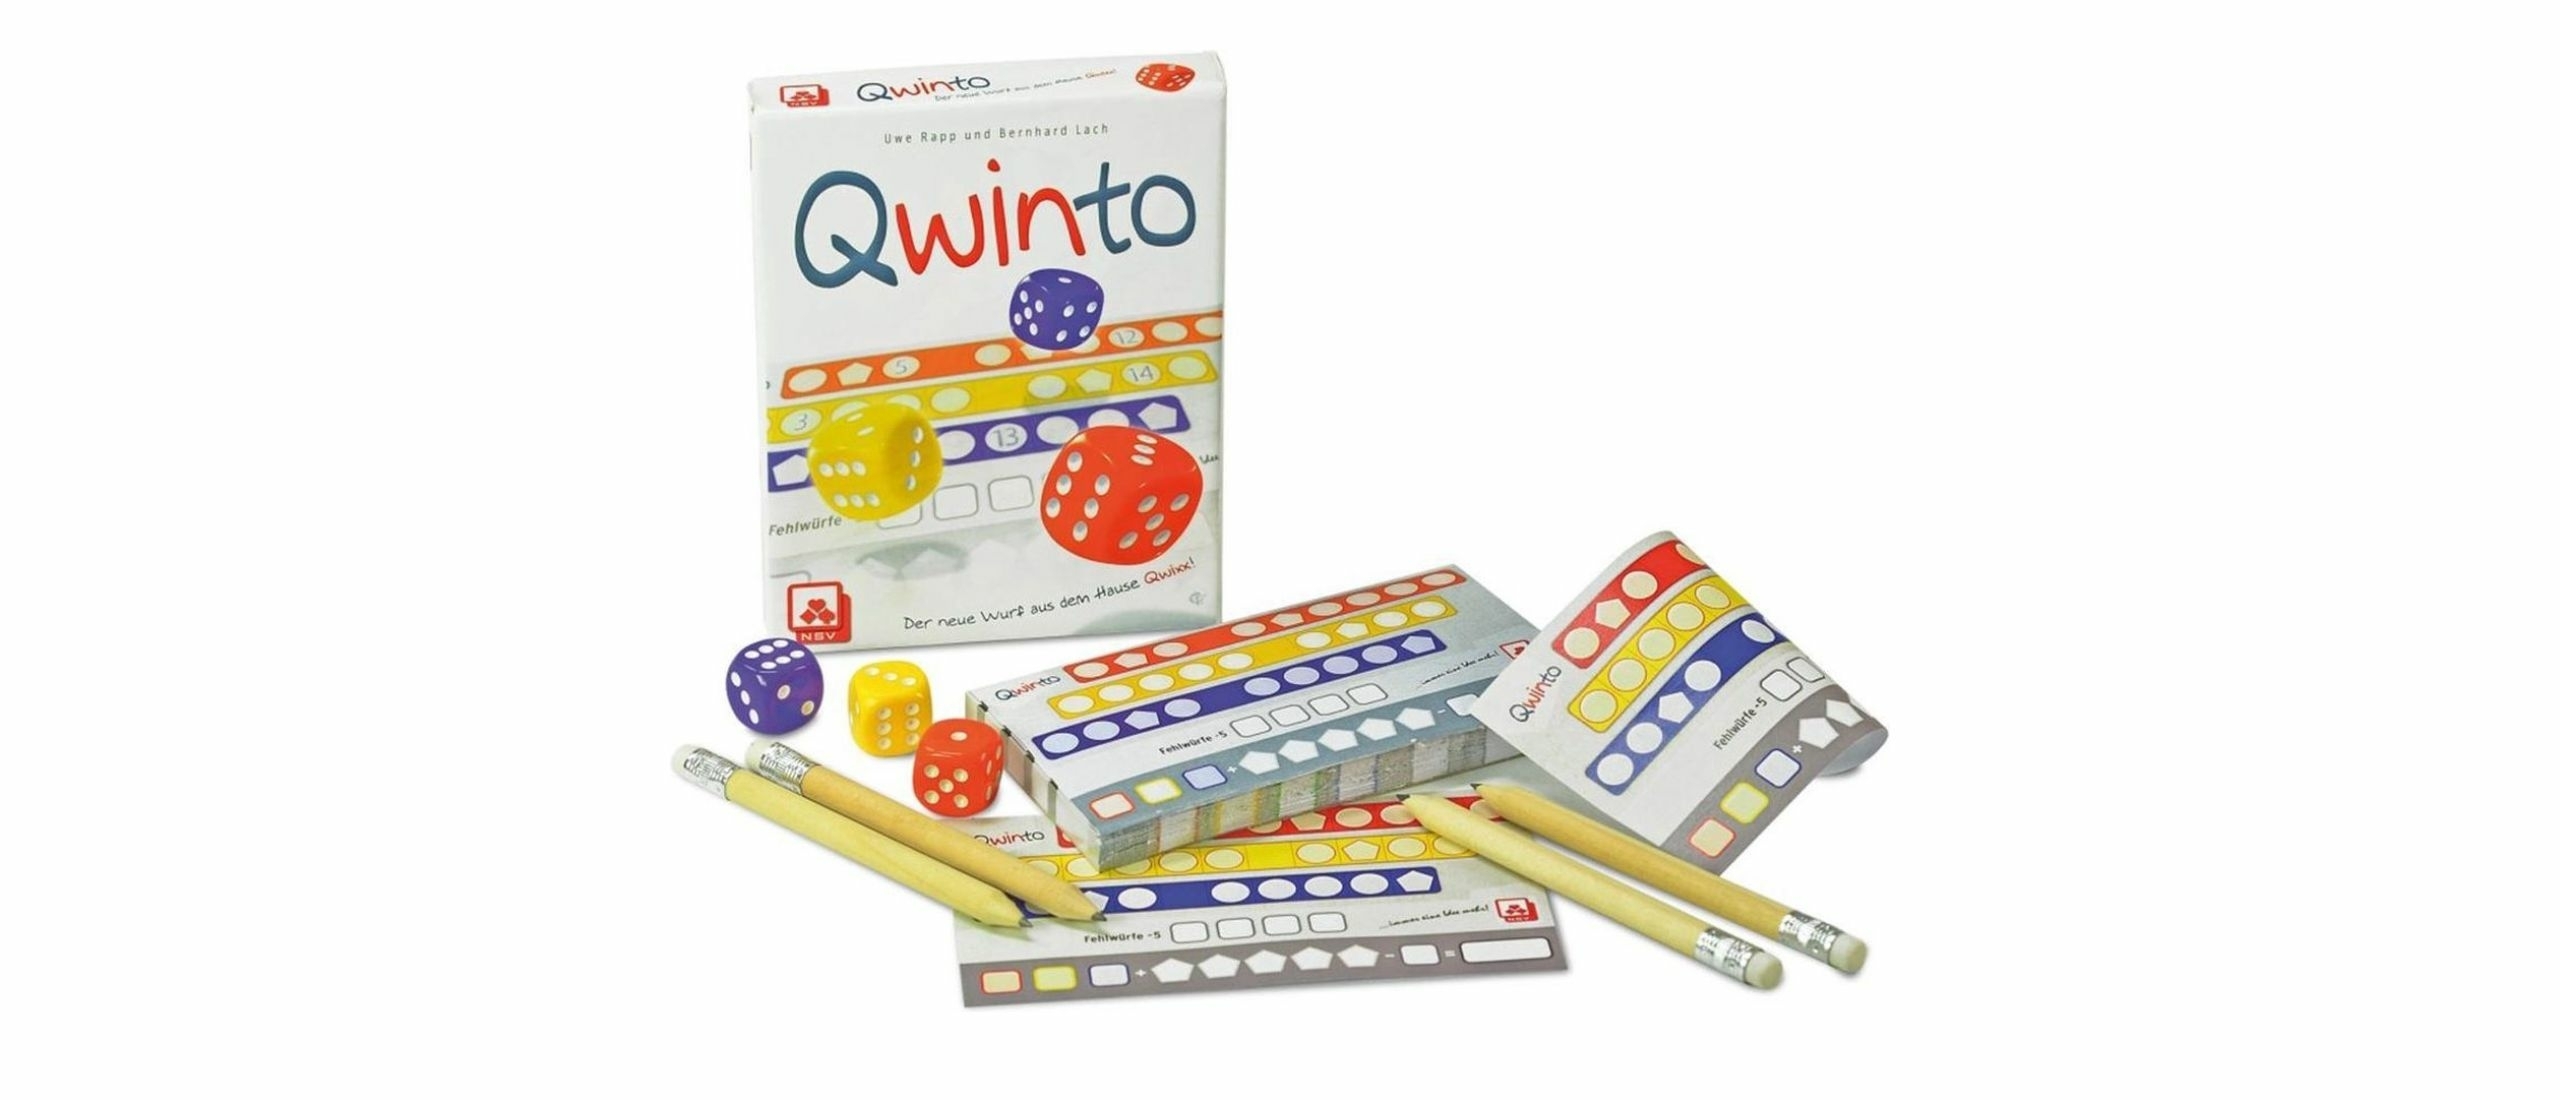 Qwinto dobbelspel review